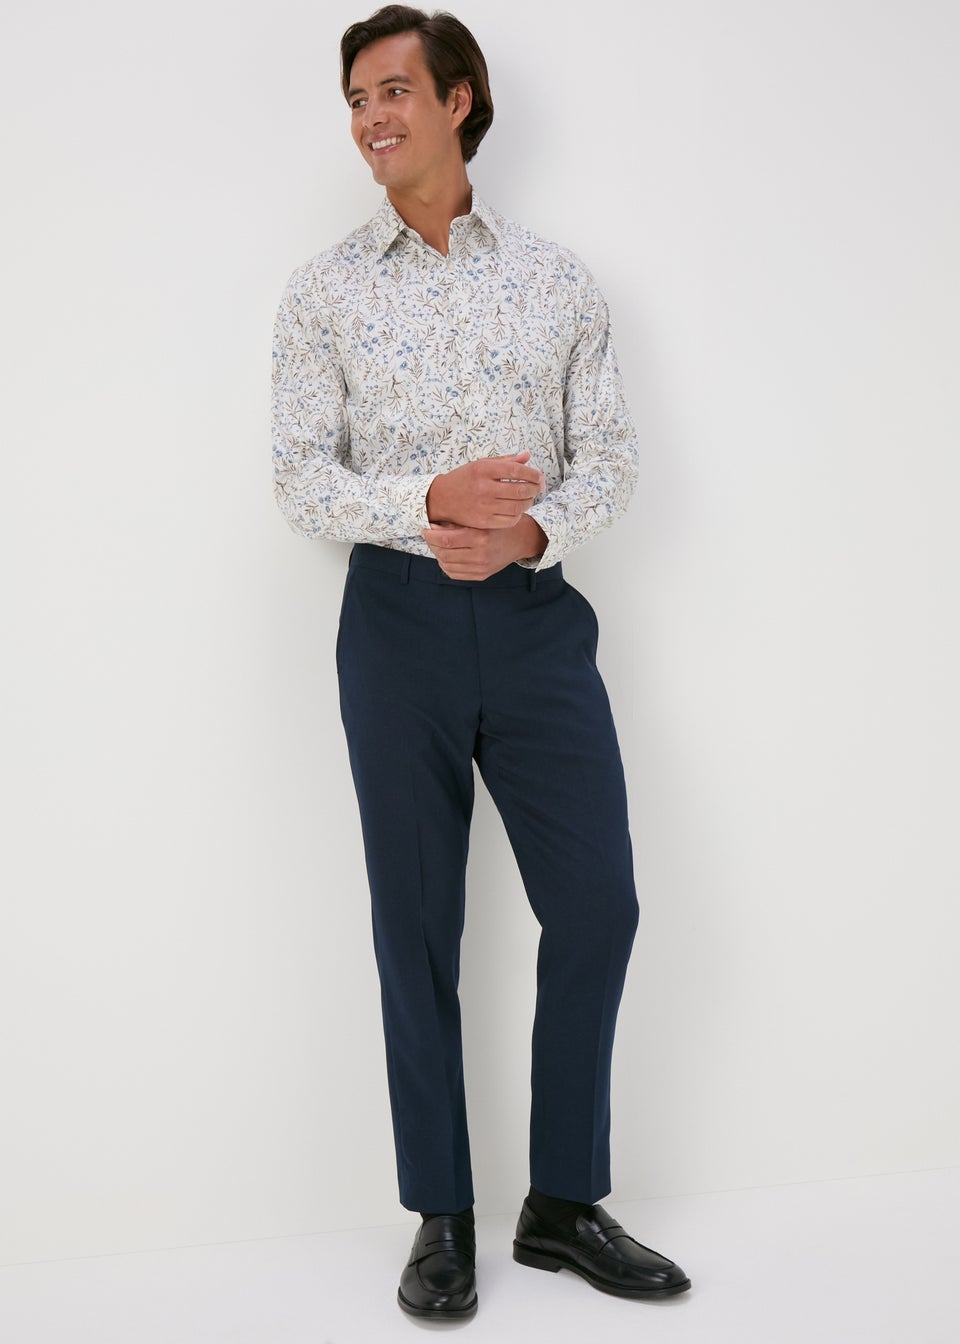 Taylor & Wright Navy Albarn Tailored Fit Trousers